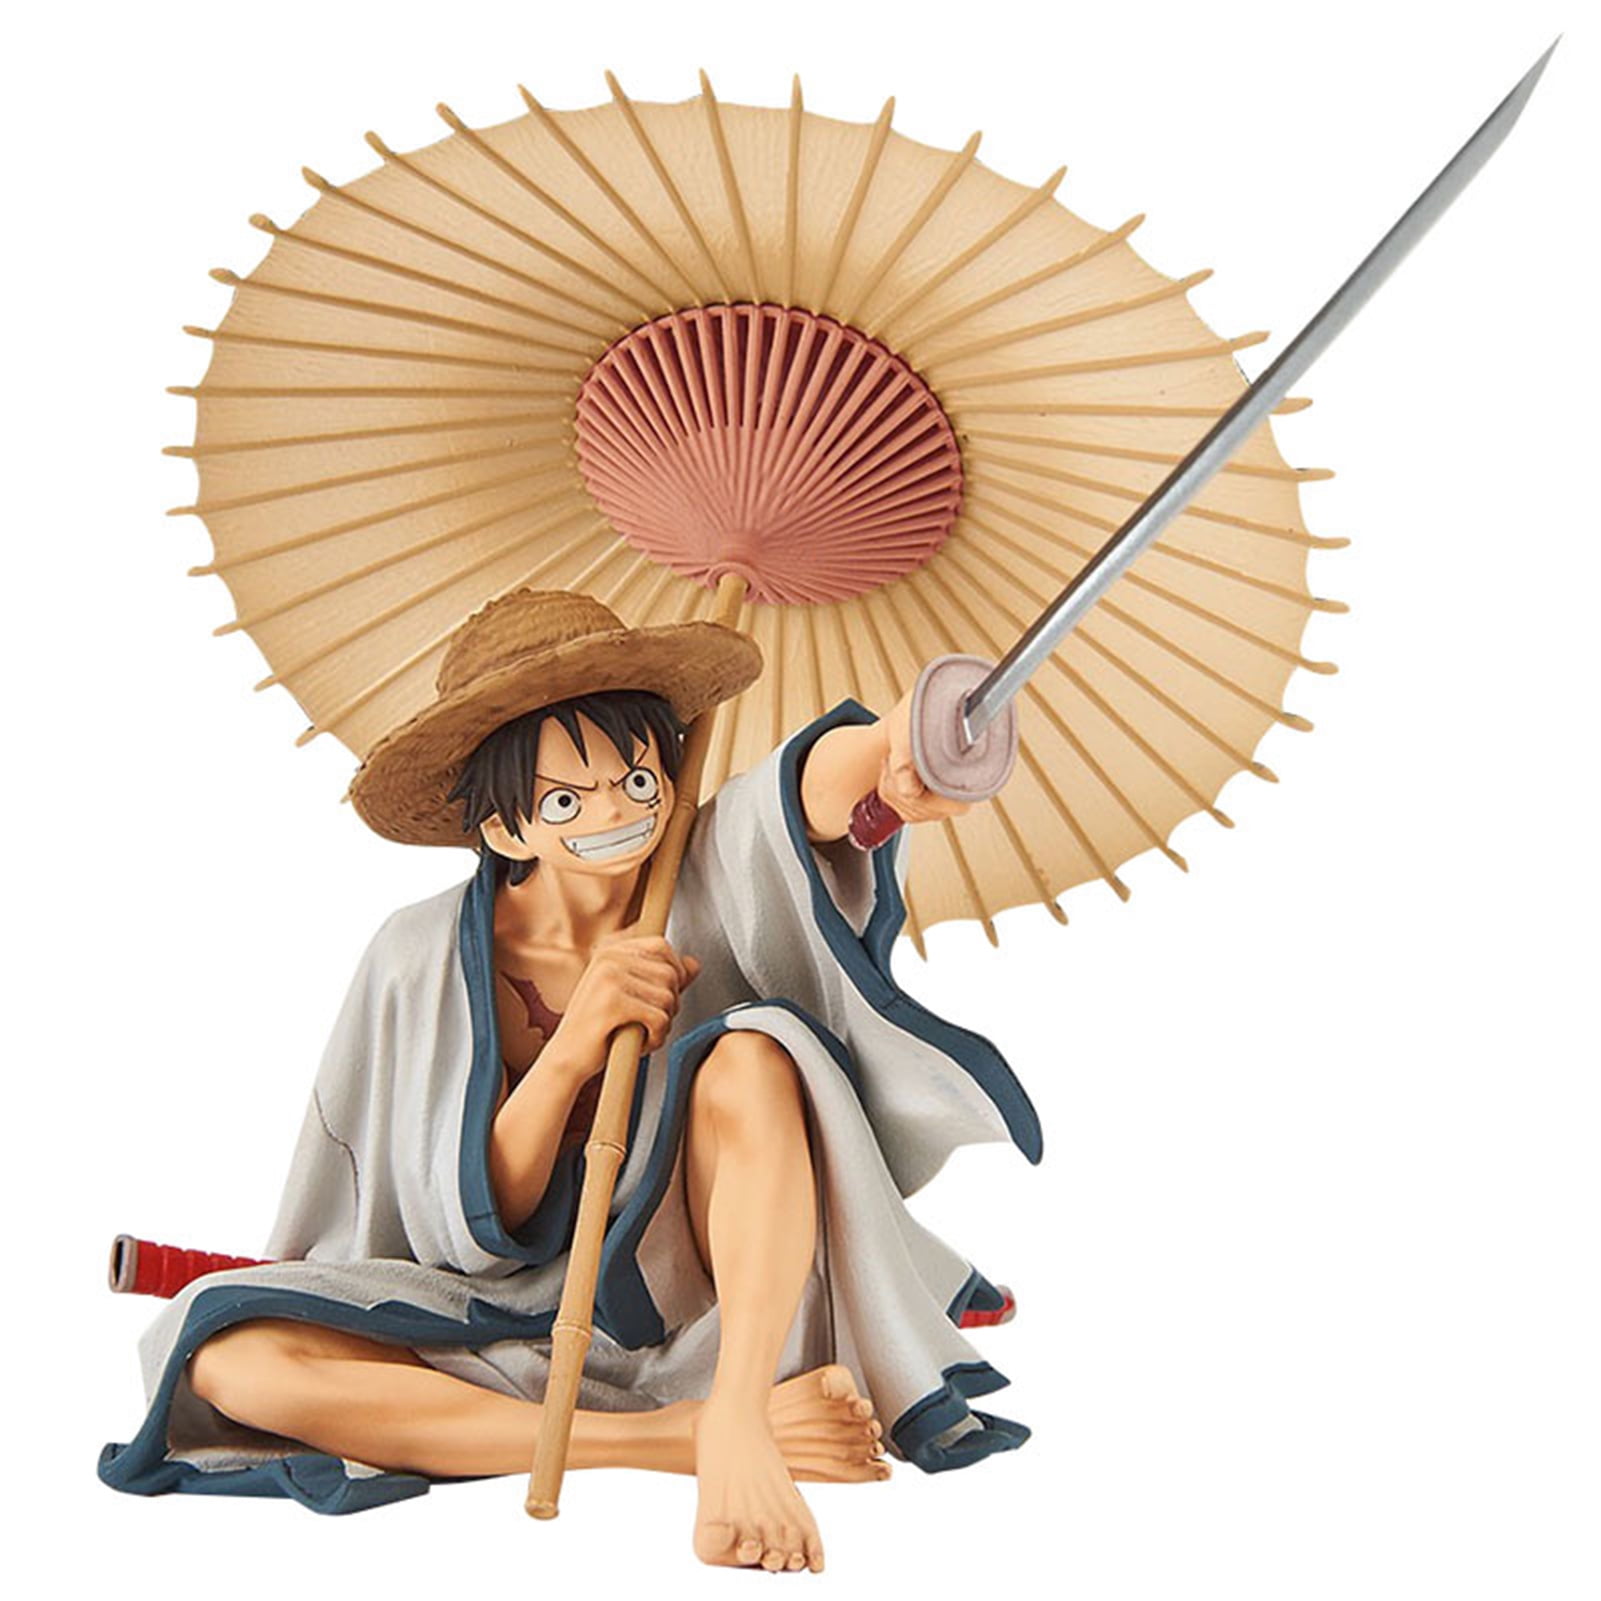  Visit the Kimkoala Store Anime One Piece Luffy Figures